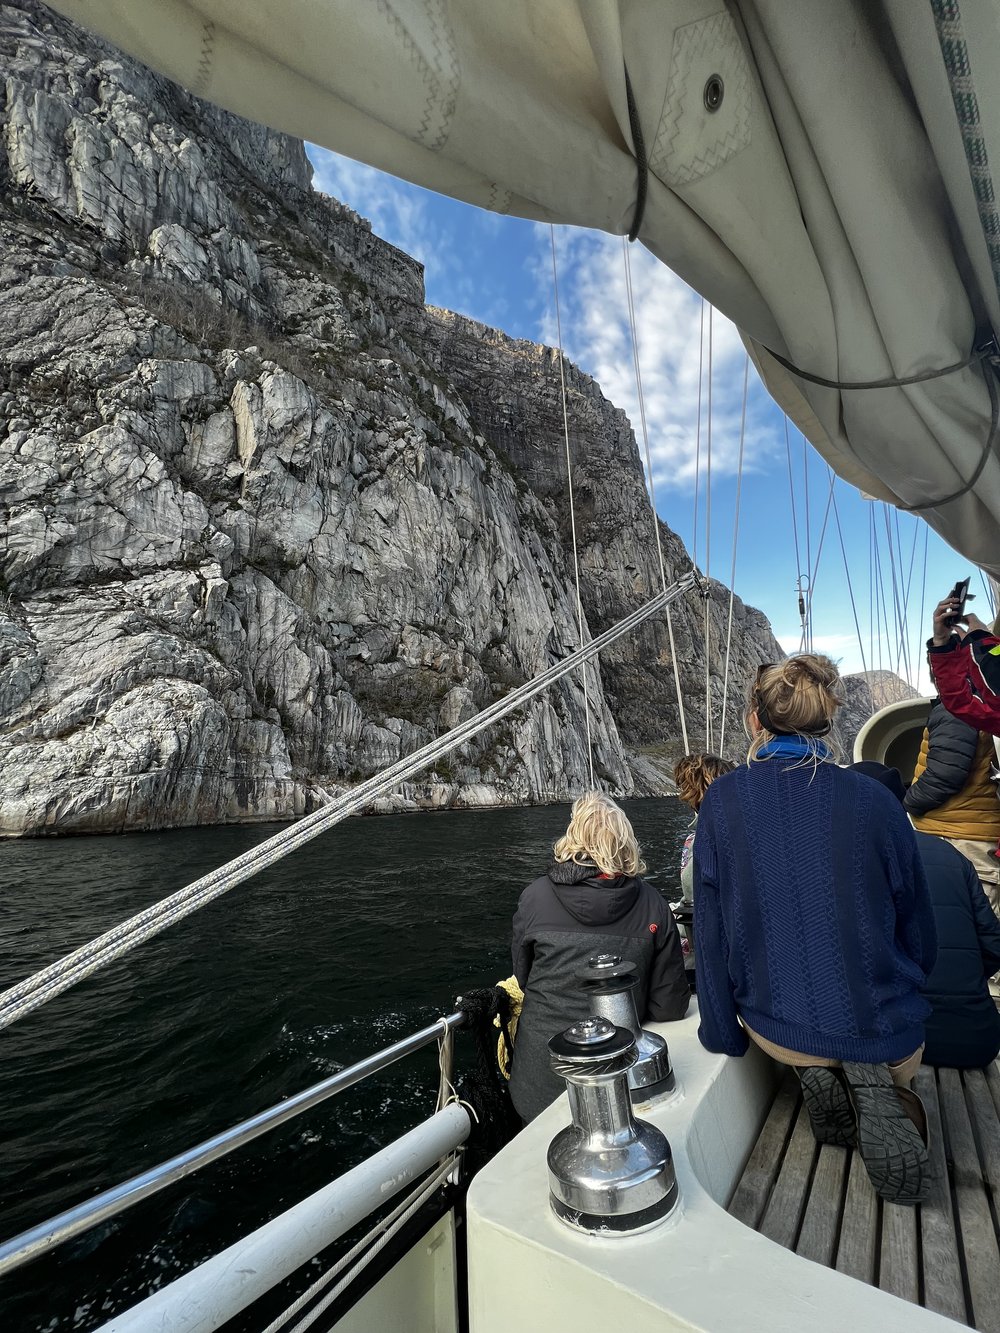  Sailing in deep and narrow fjords. ©Belén Garcia Ovide 